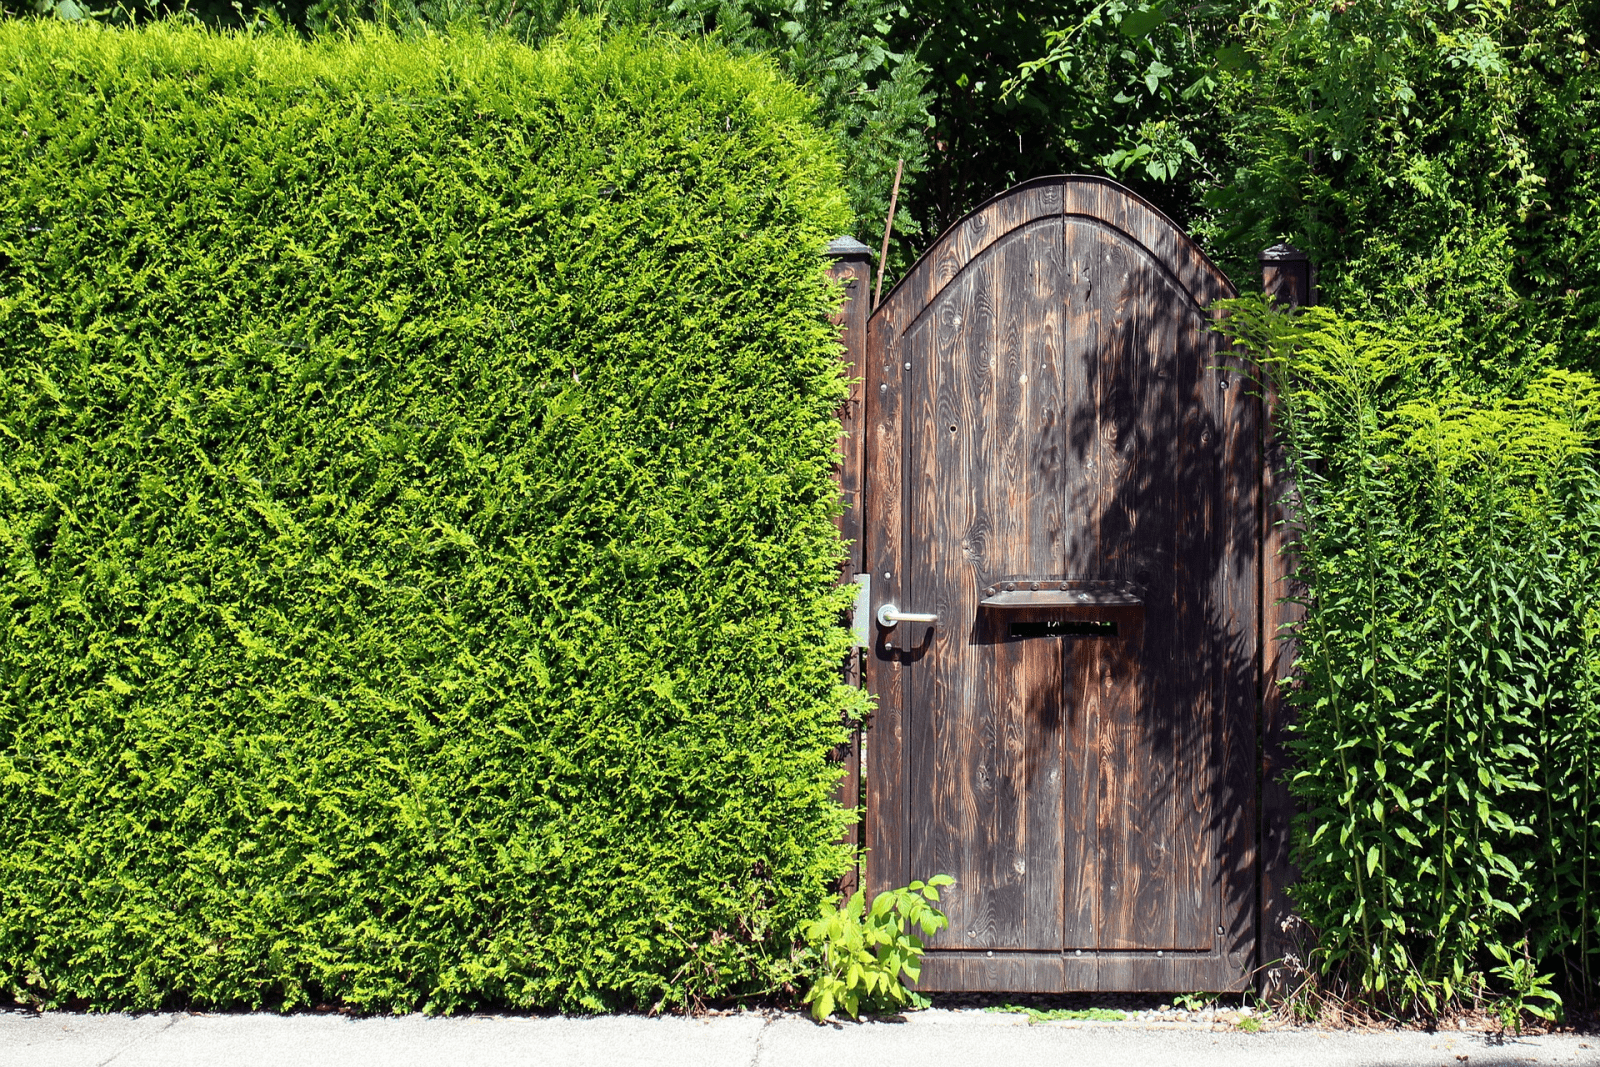 Picking the best lock for your garden gate